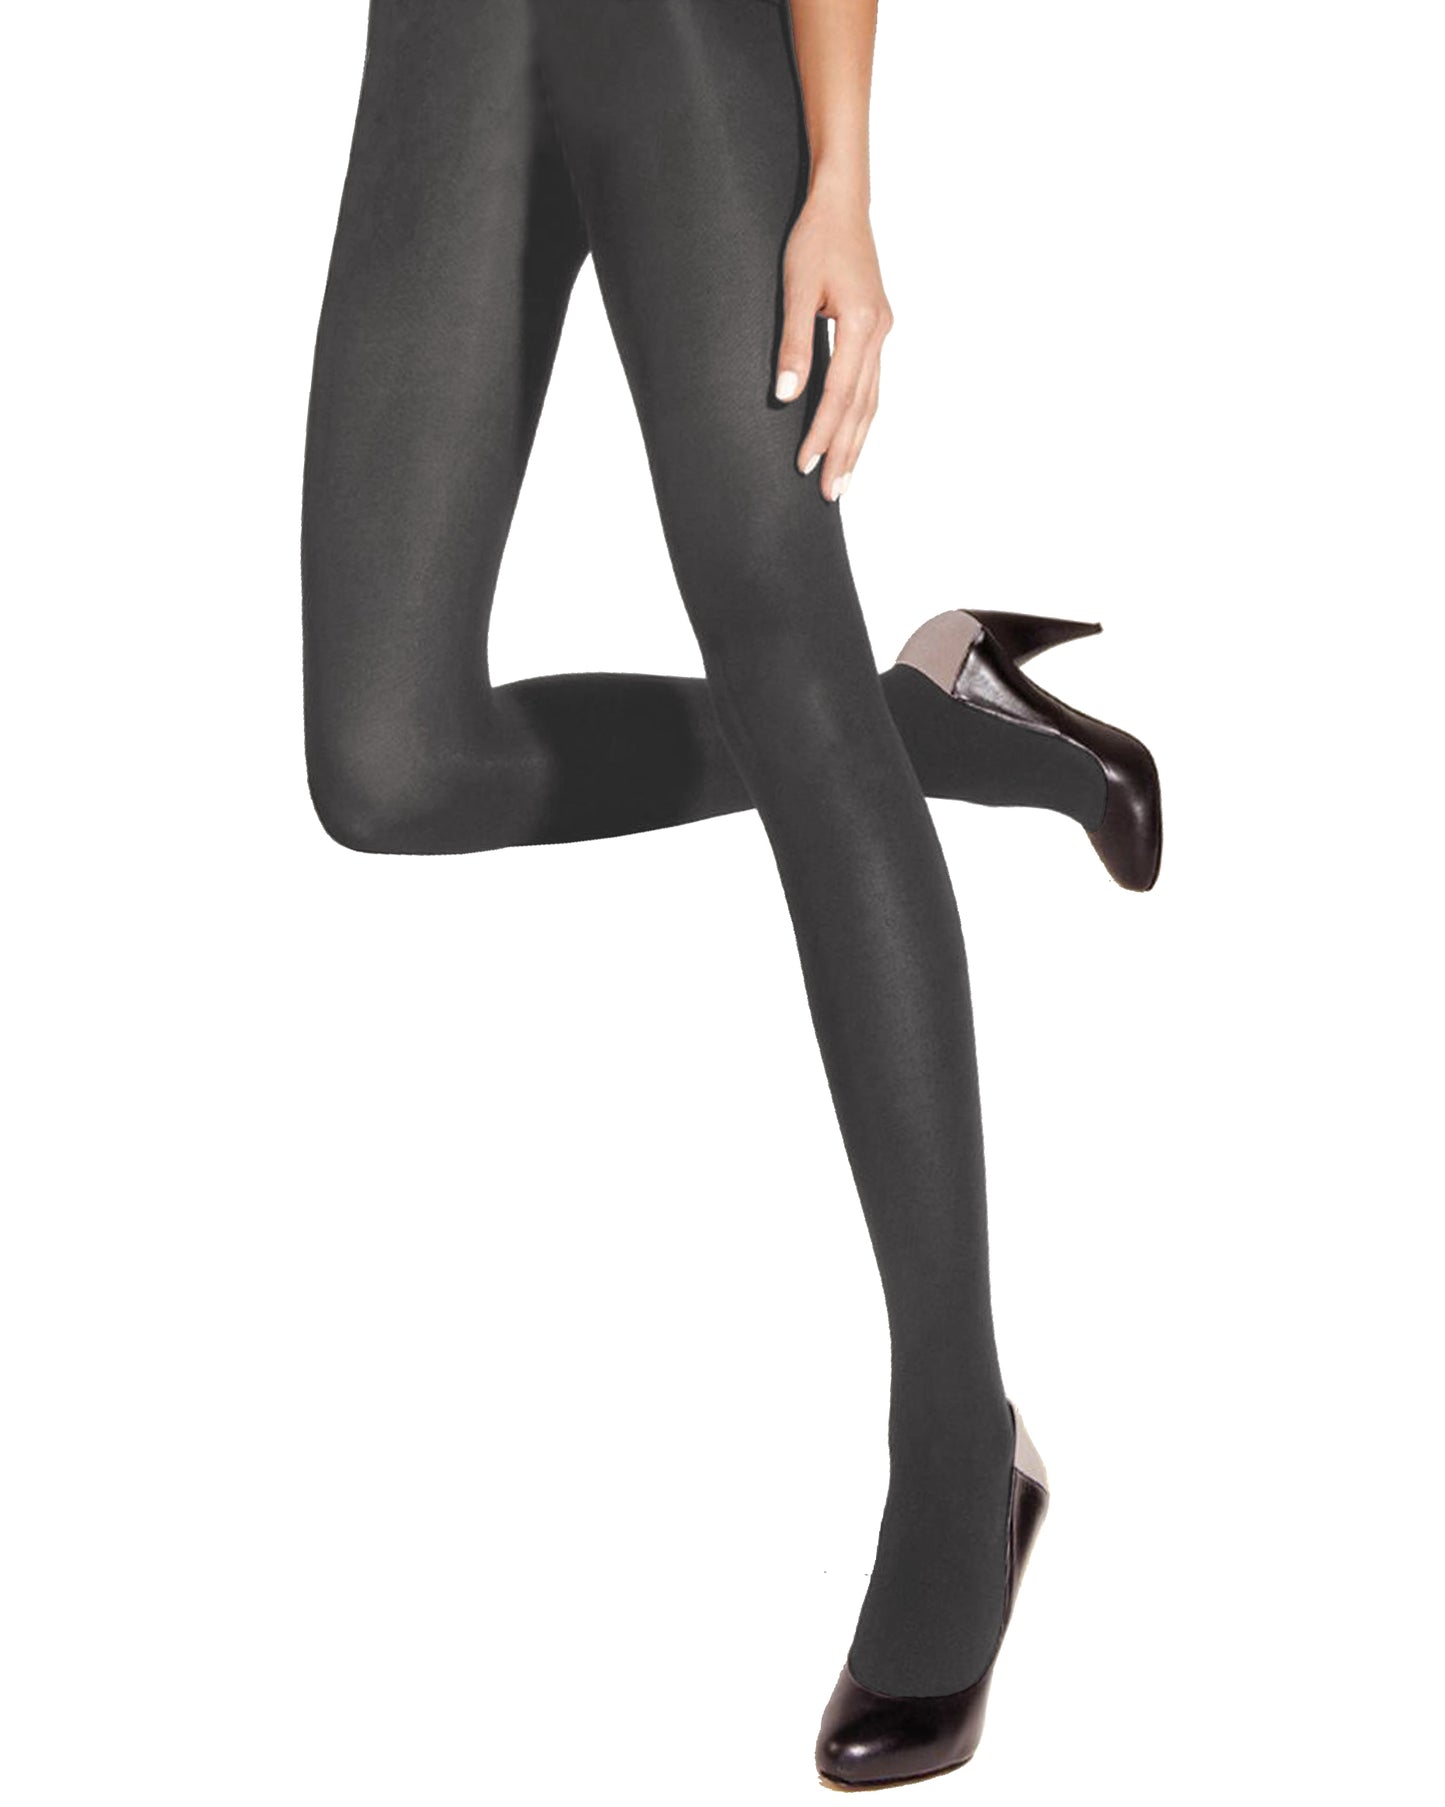 Omsa Micro & Cotton Tights - ultra opaque matte cotton lined winter thermal tights in grey.